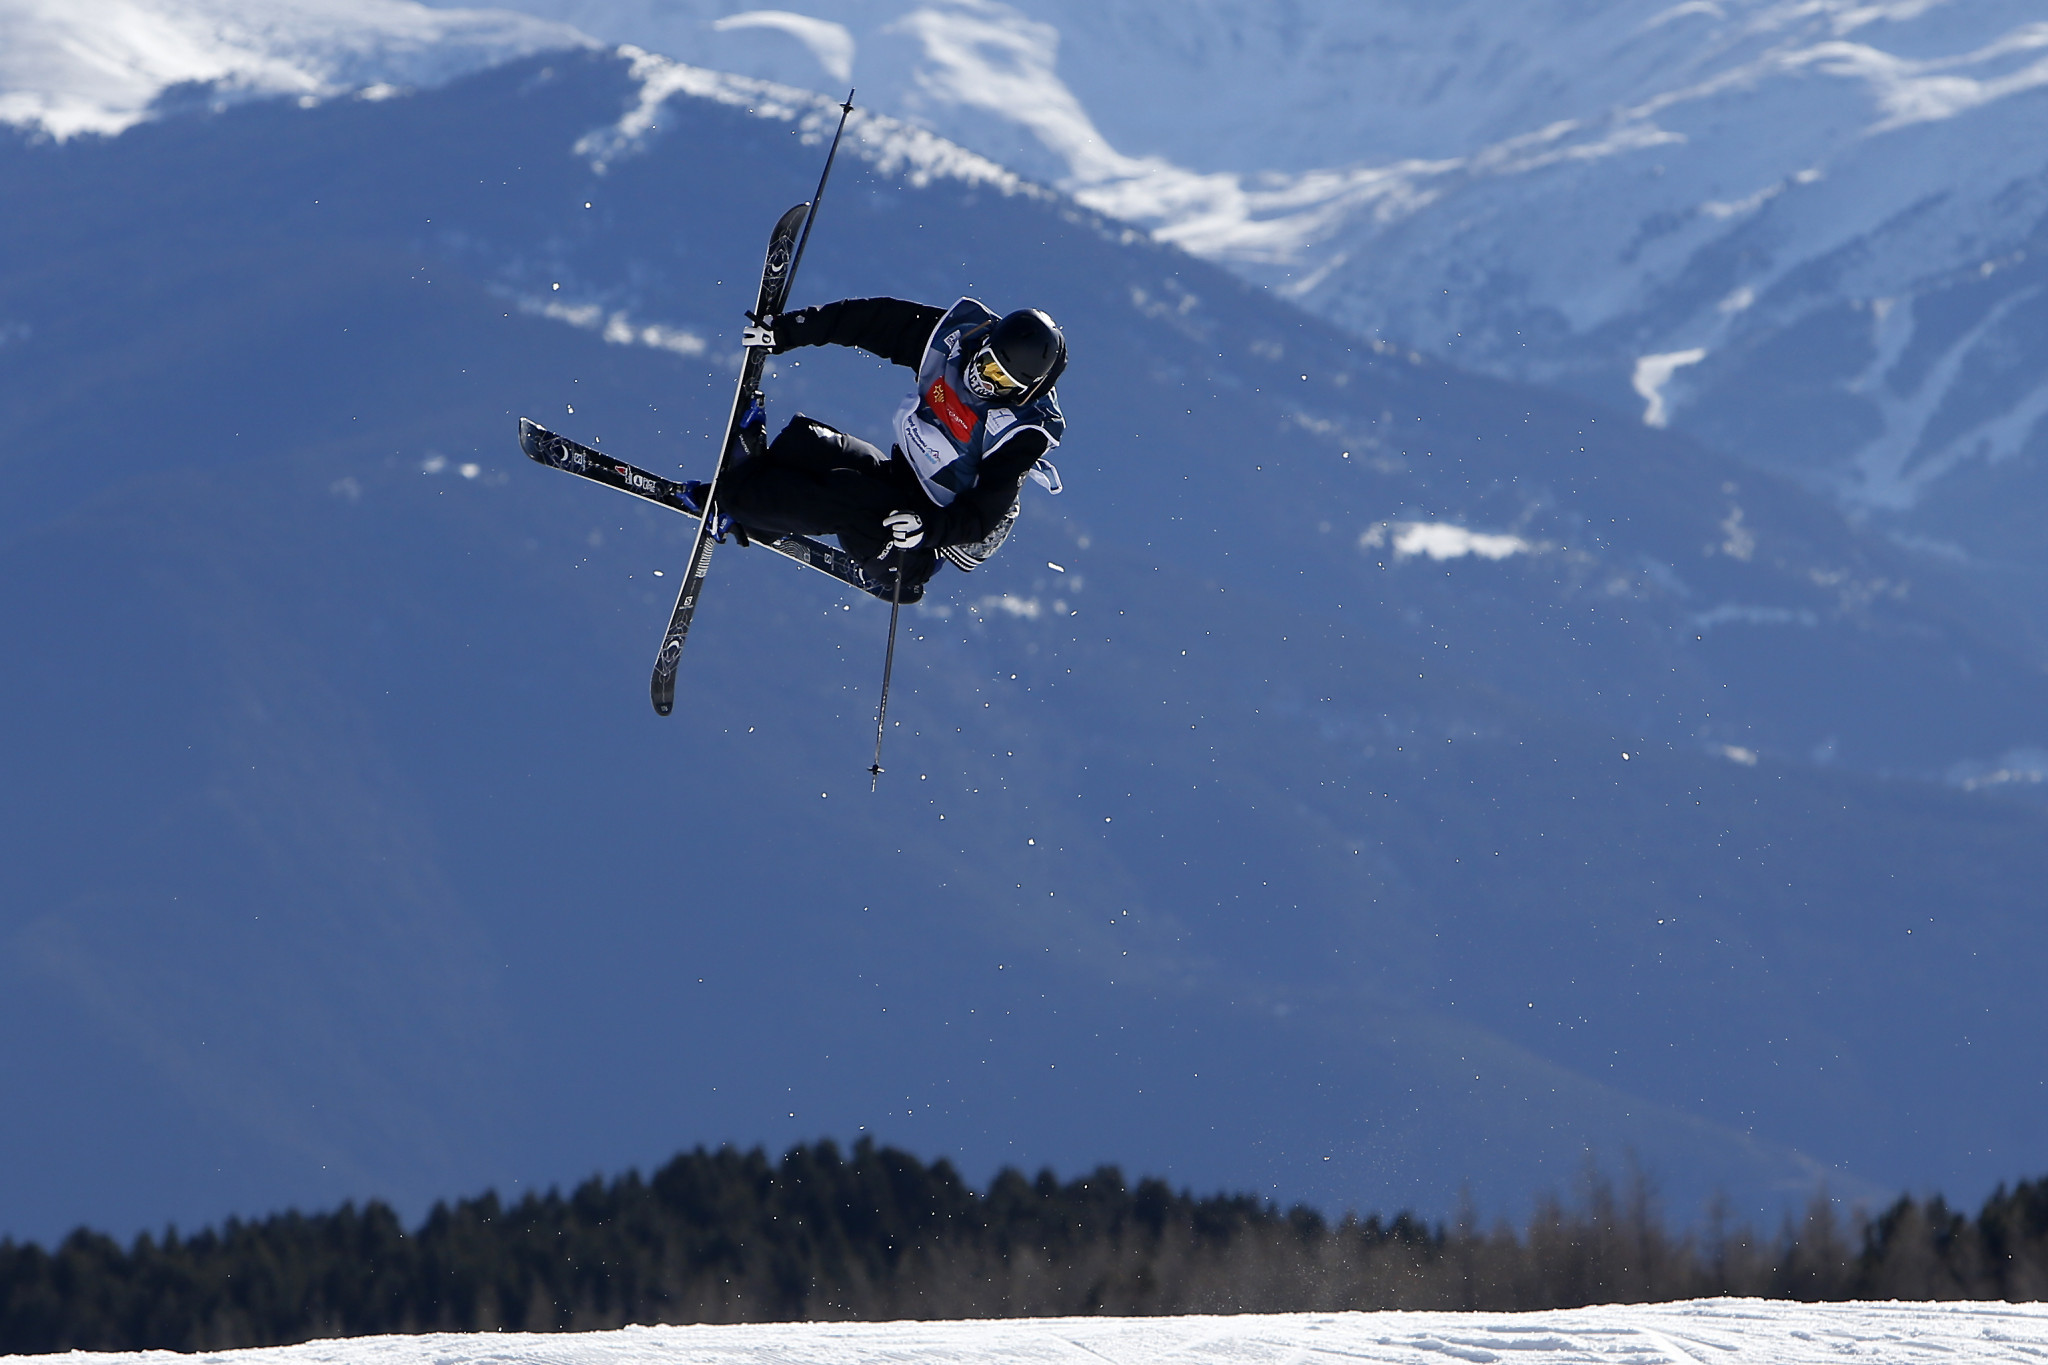 FIS Freestyle Skiing World Cup set to resume with slopestyle event in Font Romeu